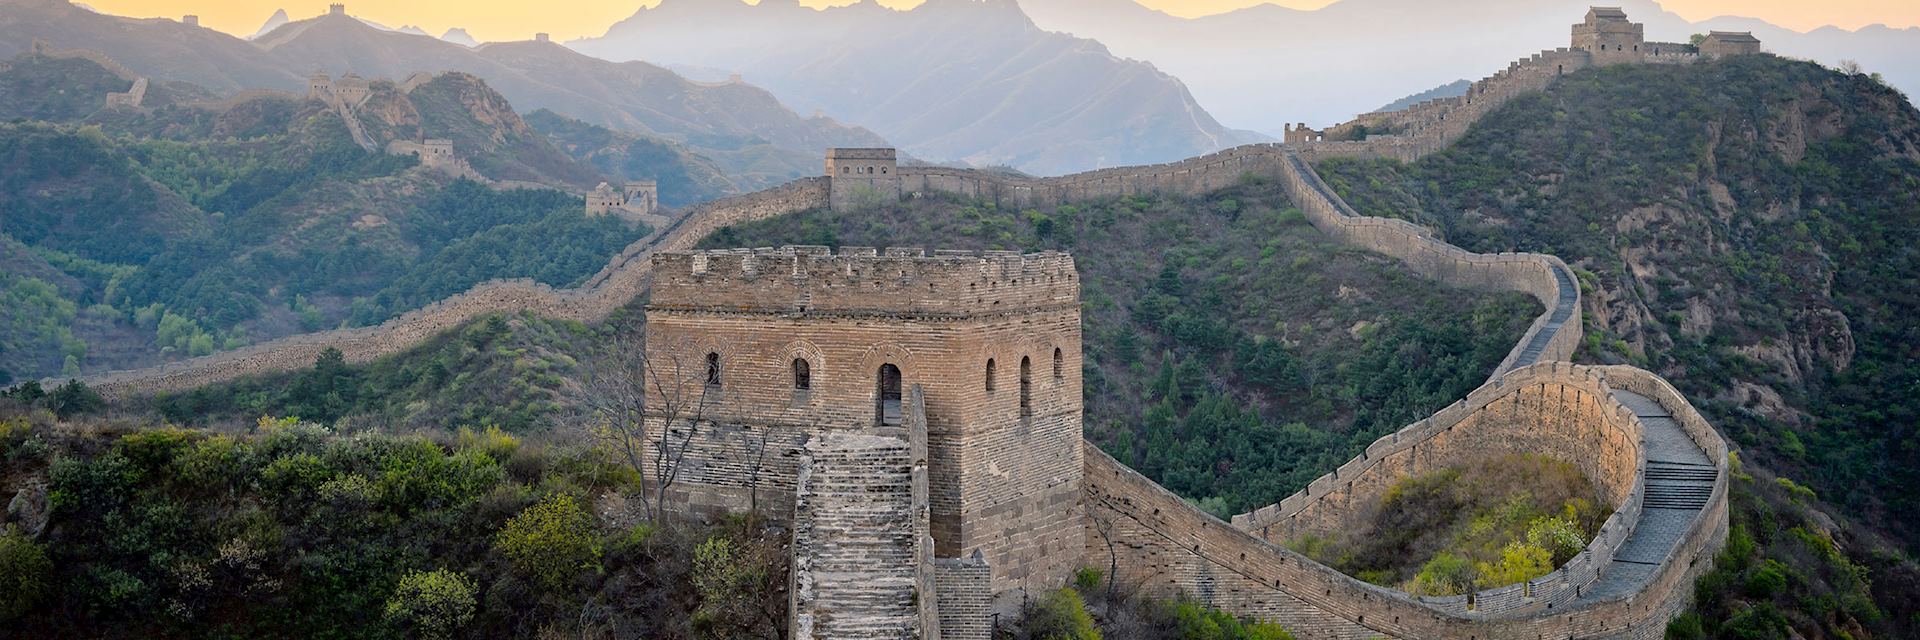 Dawn breaking over the Great Wall of China in Jinshanling